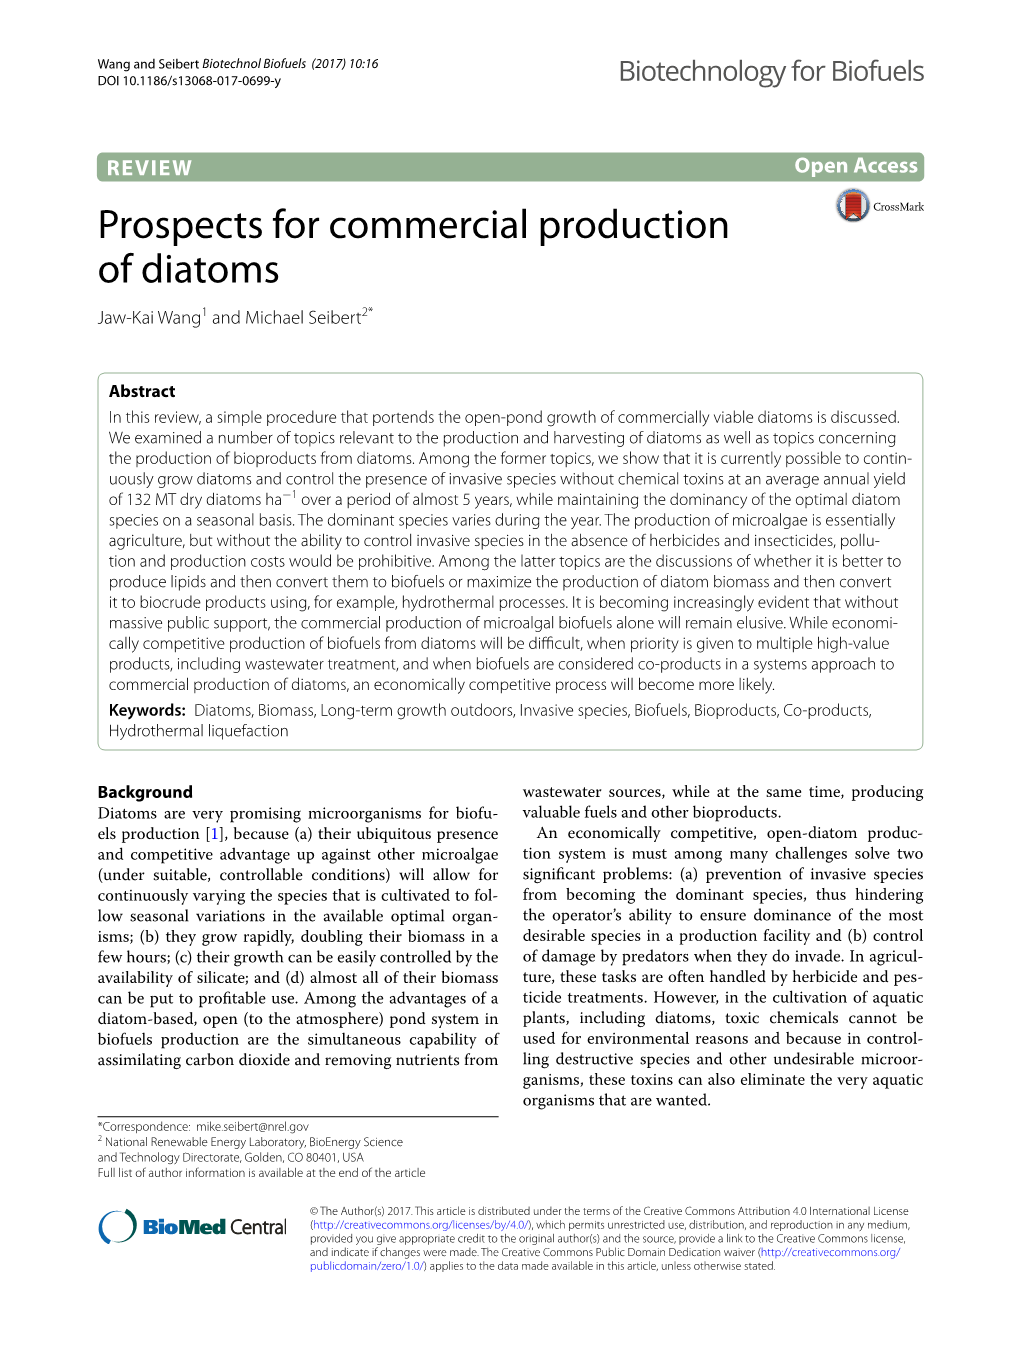 Prospects for Commercial Production of Diatoms Jaw‑Kai Wang1 and Michael Seibert2*